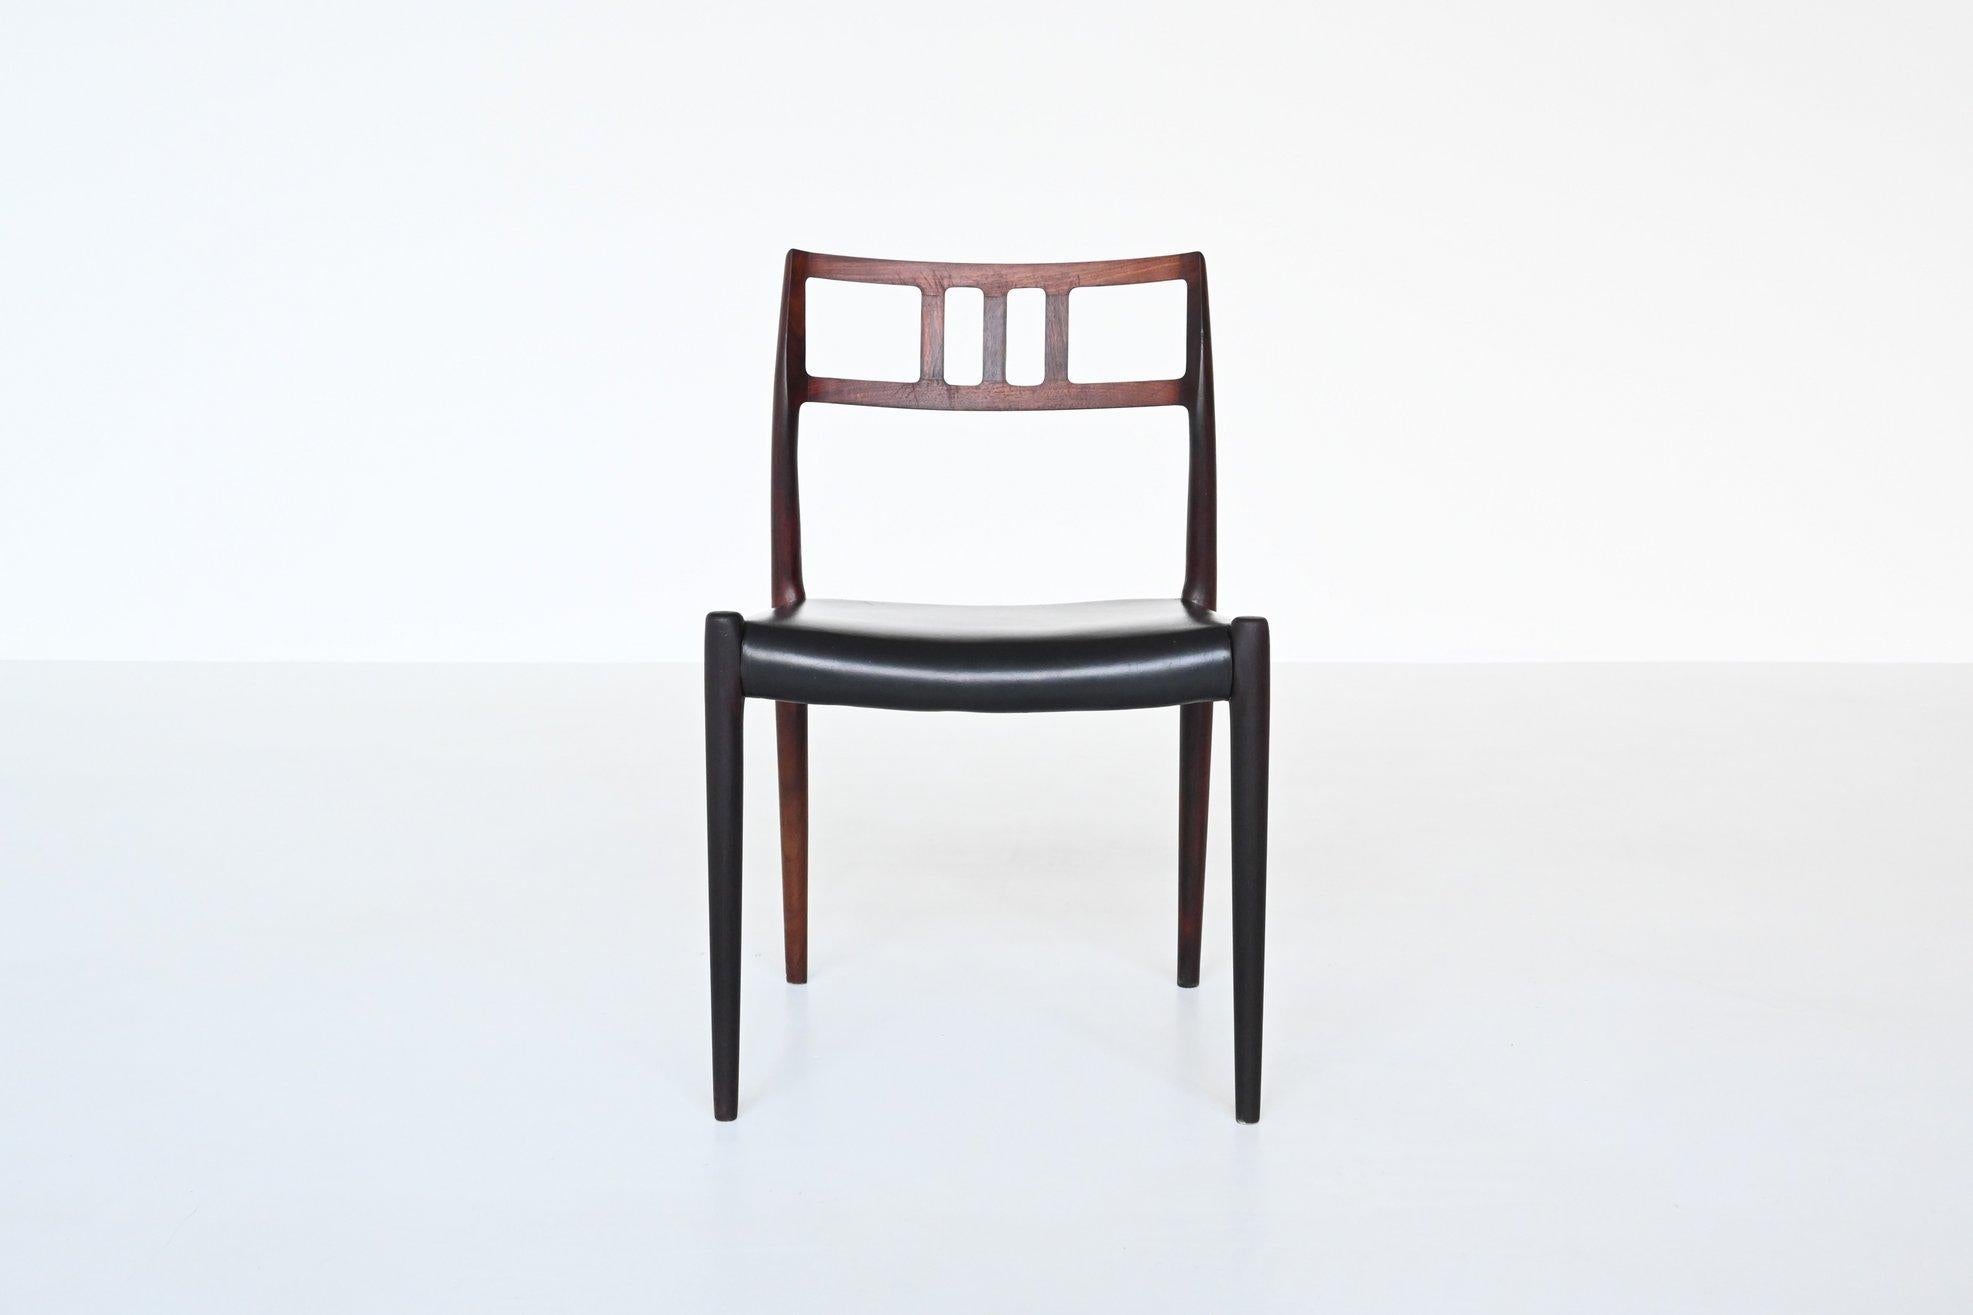 Mid-Century Modern Niels Otto Moller Model 79 Rosewood Dining Chair, Denmark, 1960